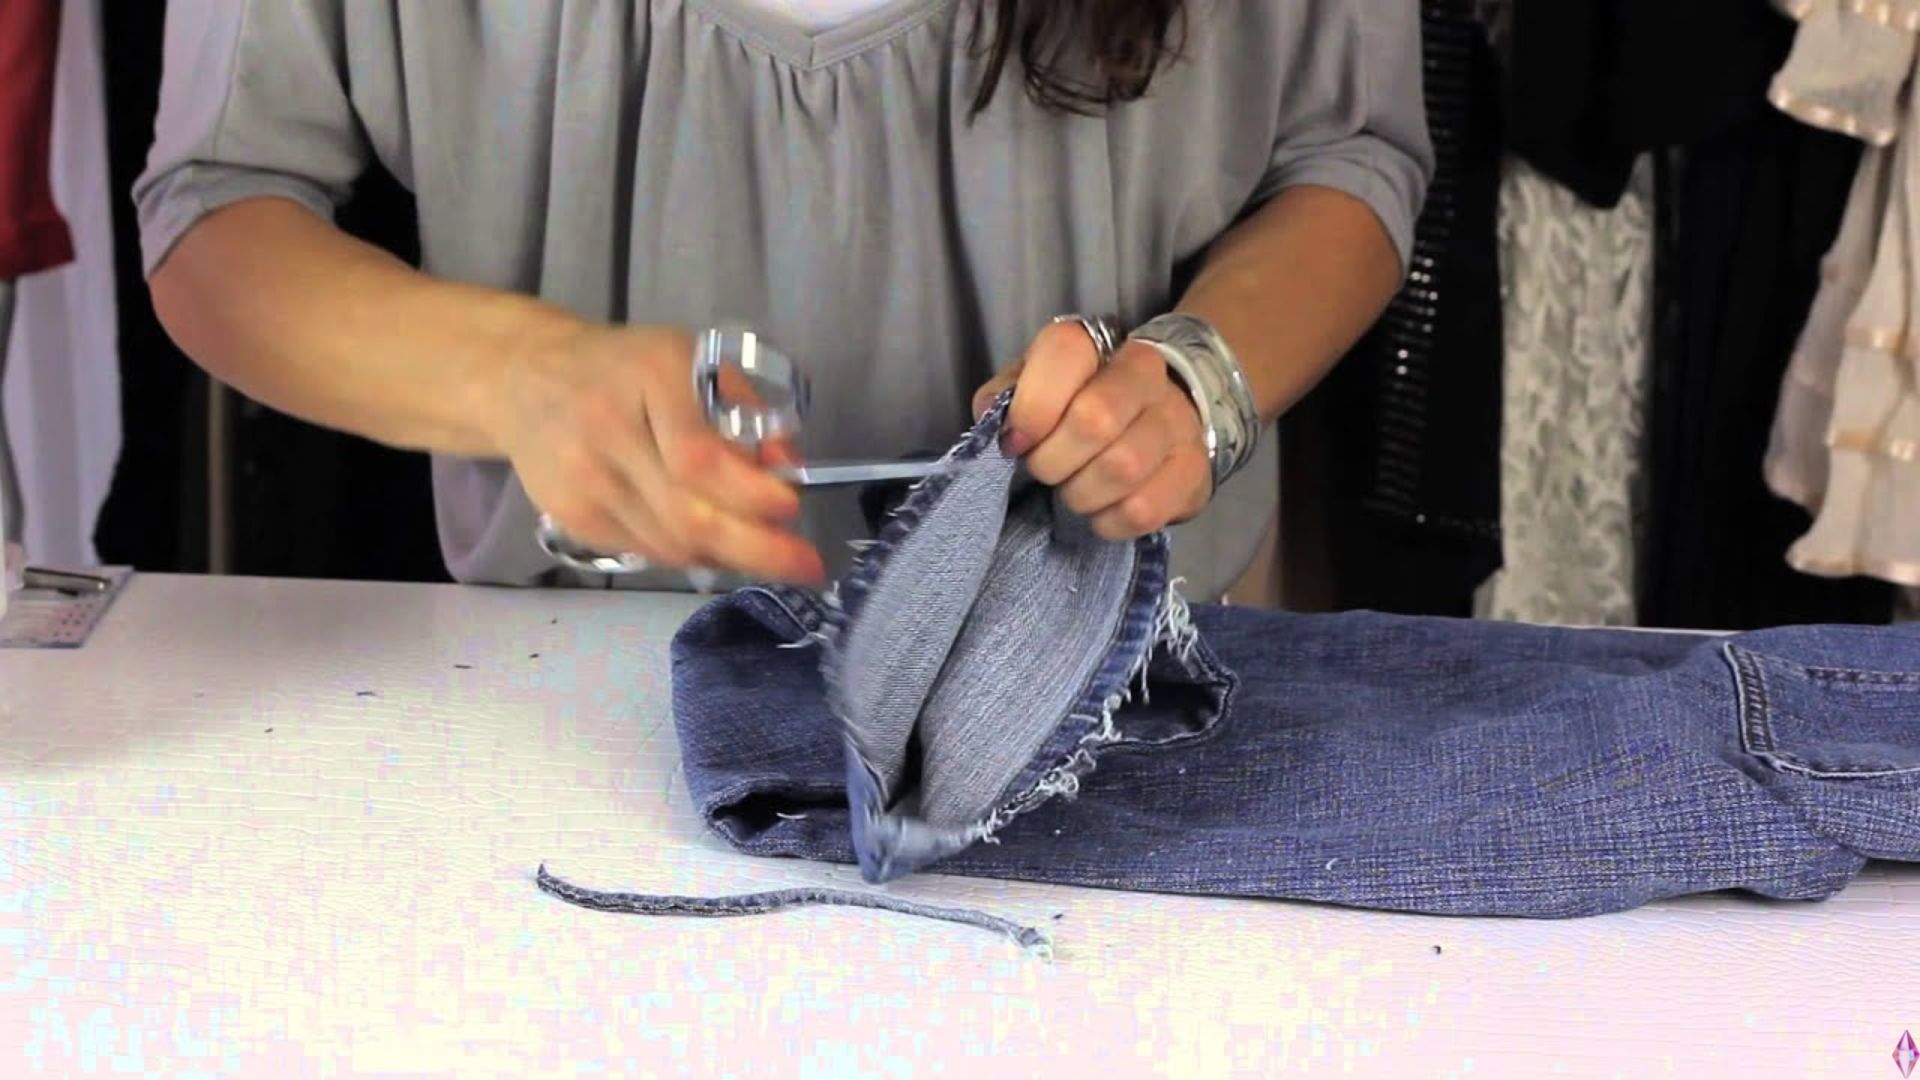 How To Fray Jeans